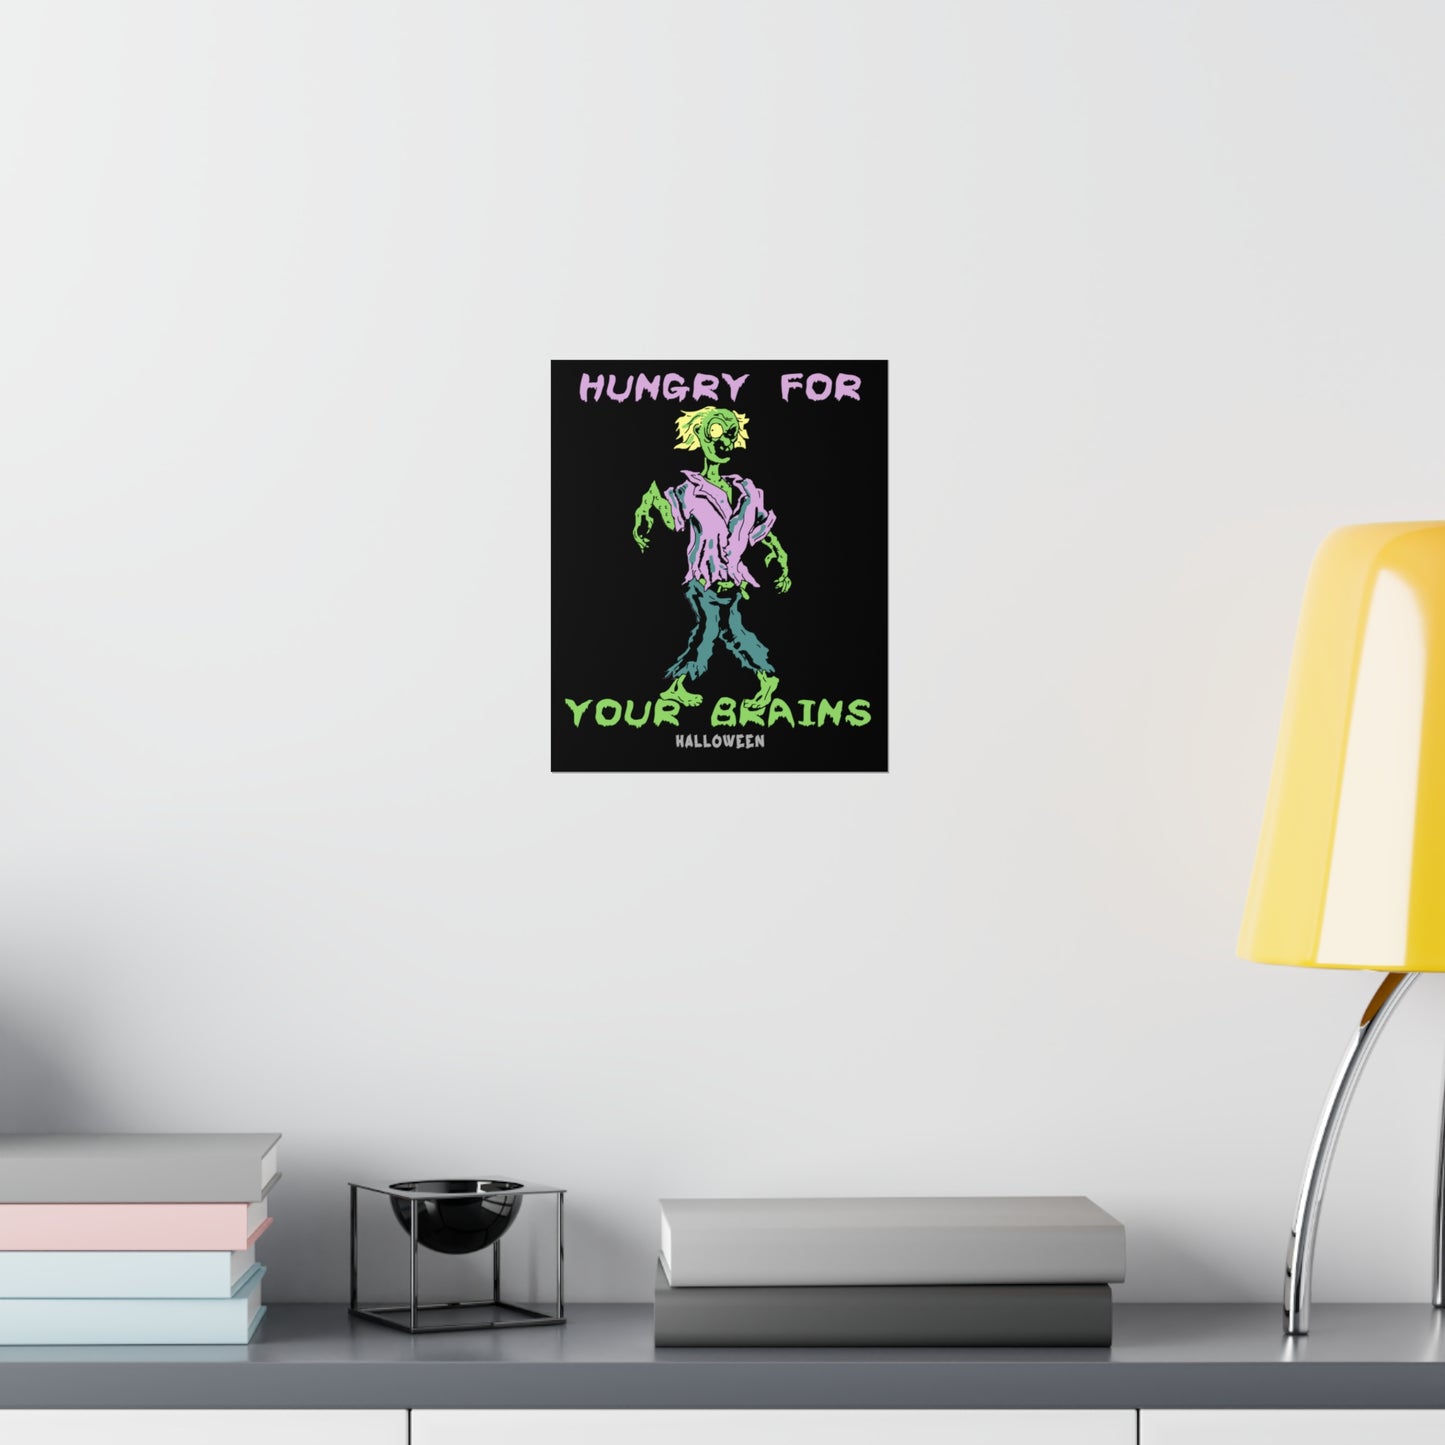 Comical Hungry Zombie Poster Sure To Be A Classroom Hit On Premium Matte Vertical Posters